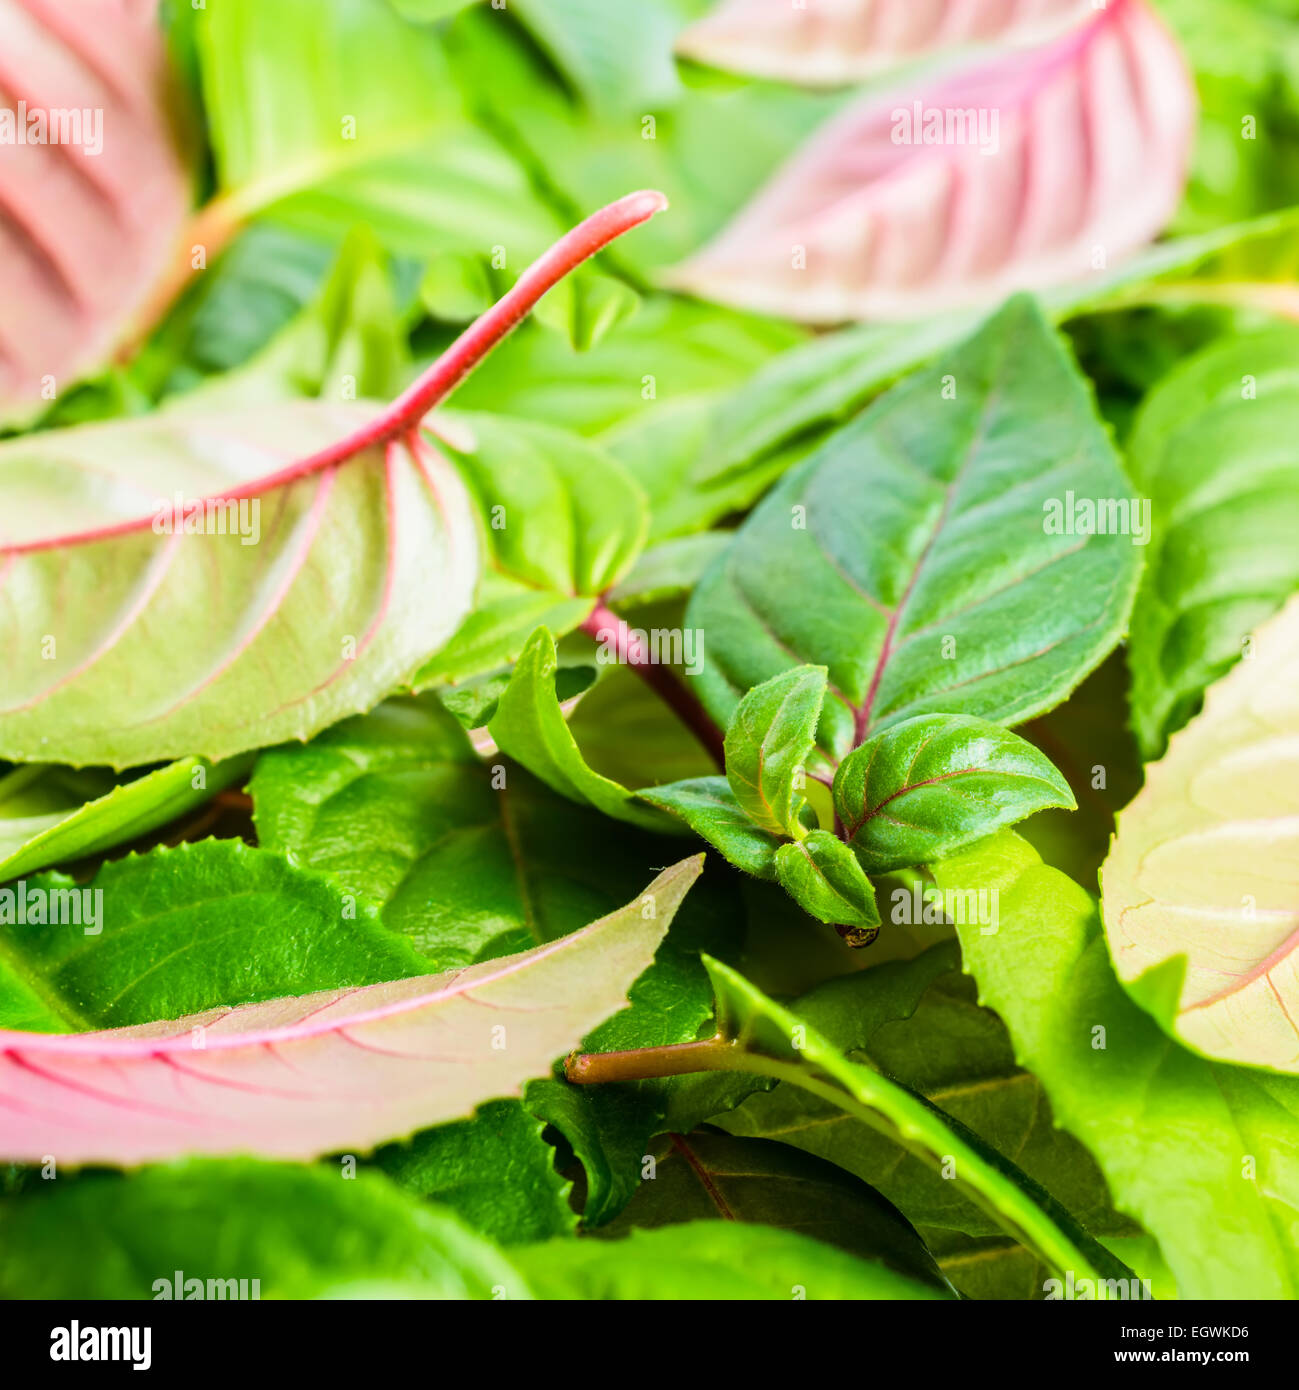 background of green and red leaves fuchsia, closeup Stock Photo